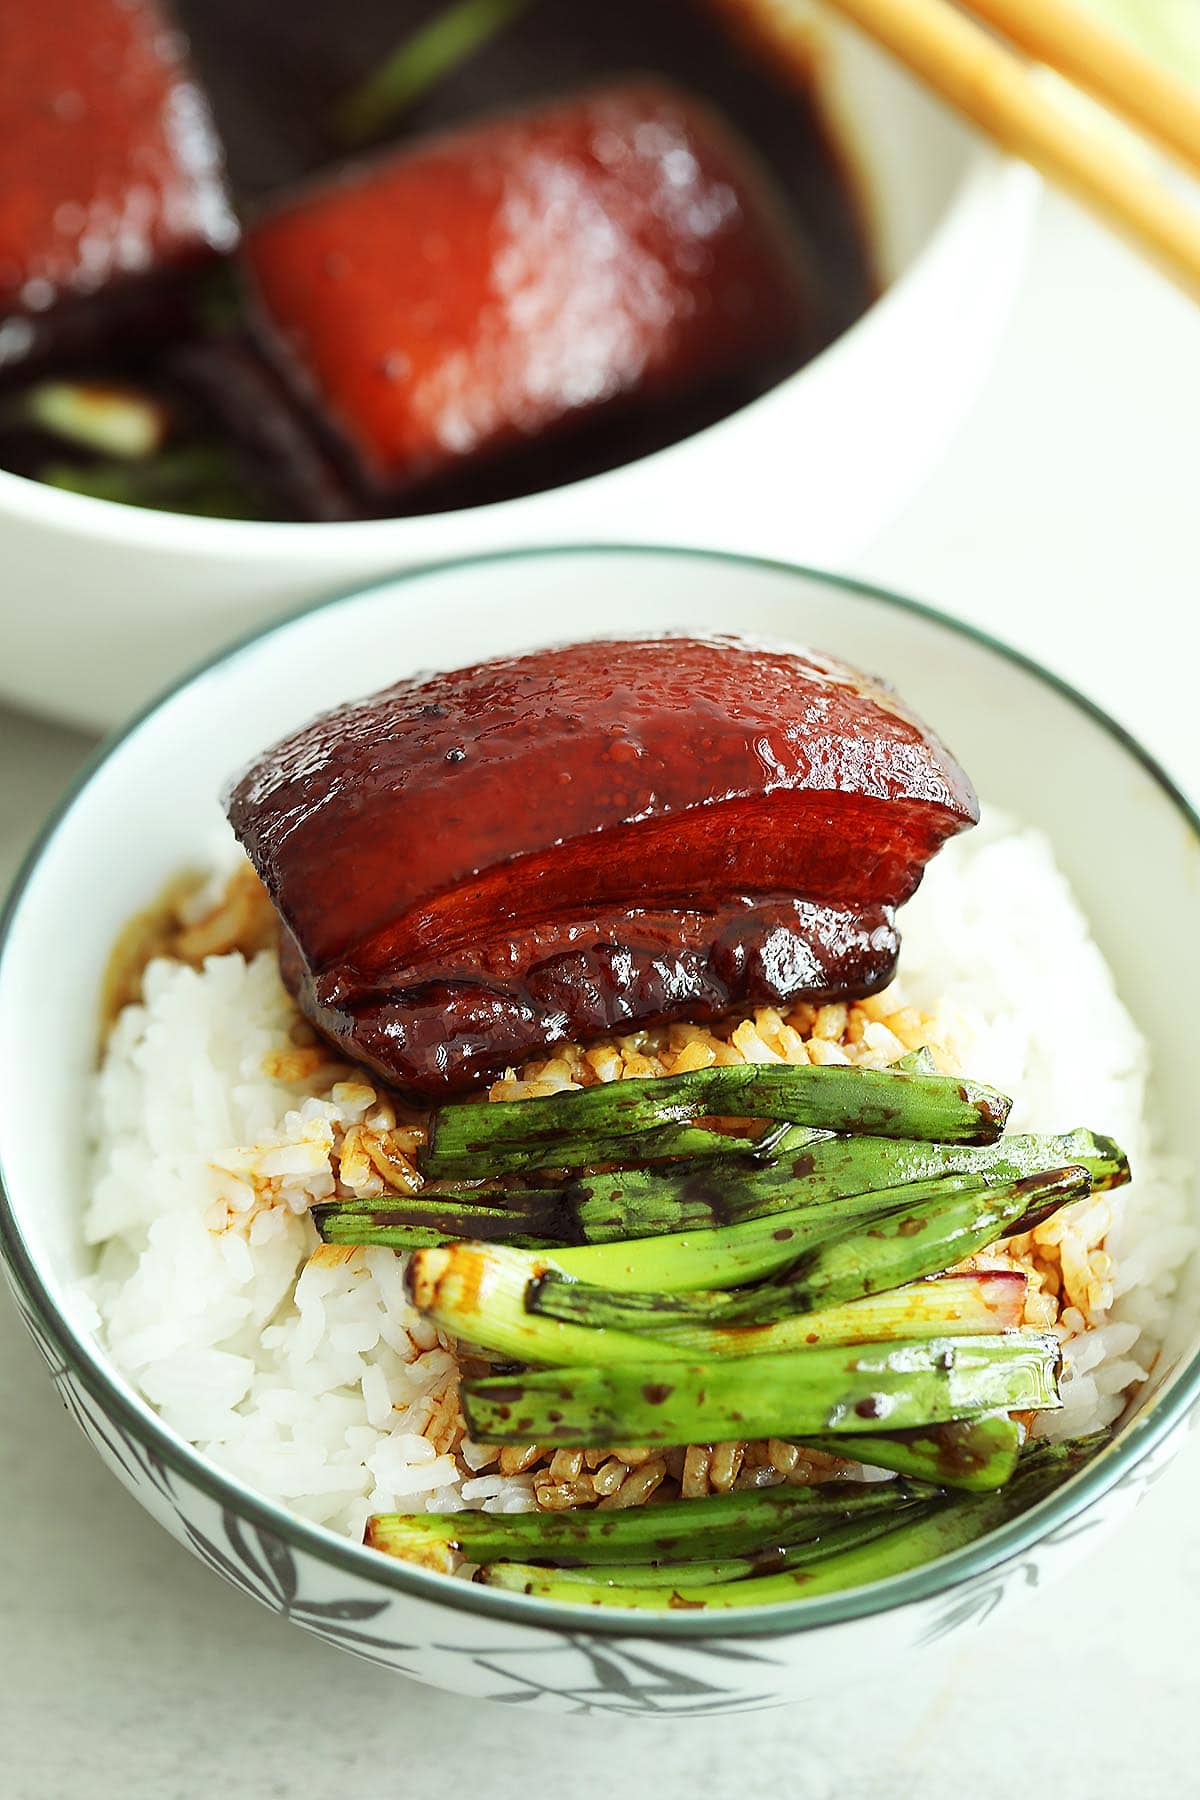 Dongpo pork (Chinese braised pork belly) with steamed rice in a bowl. 